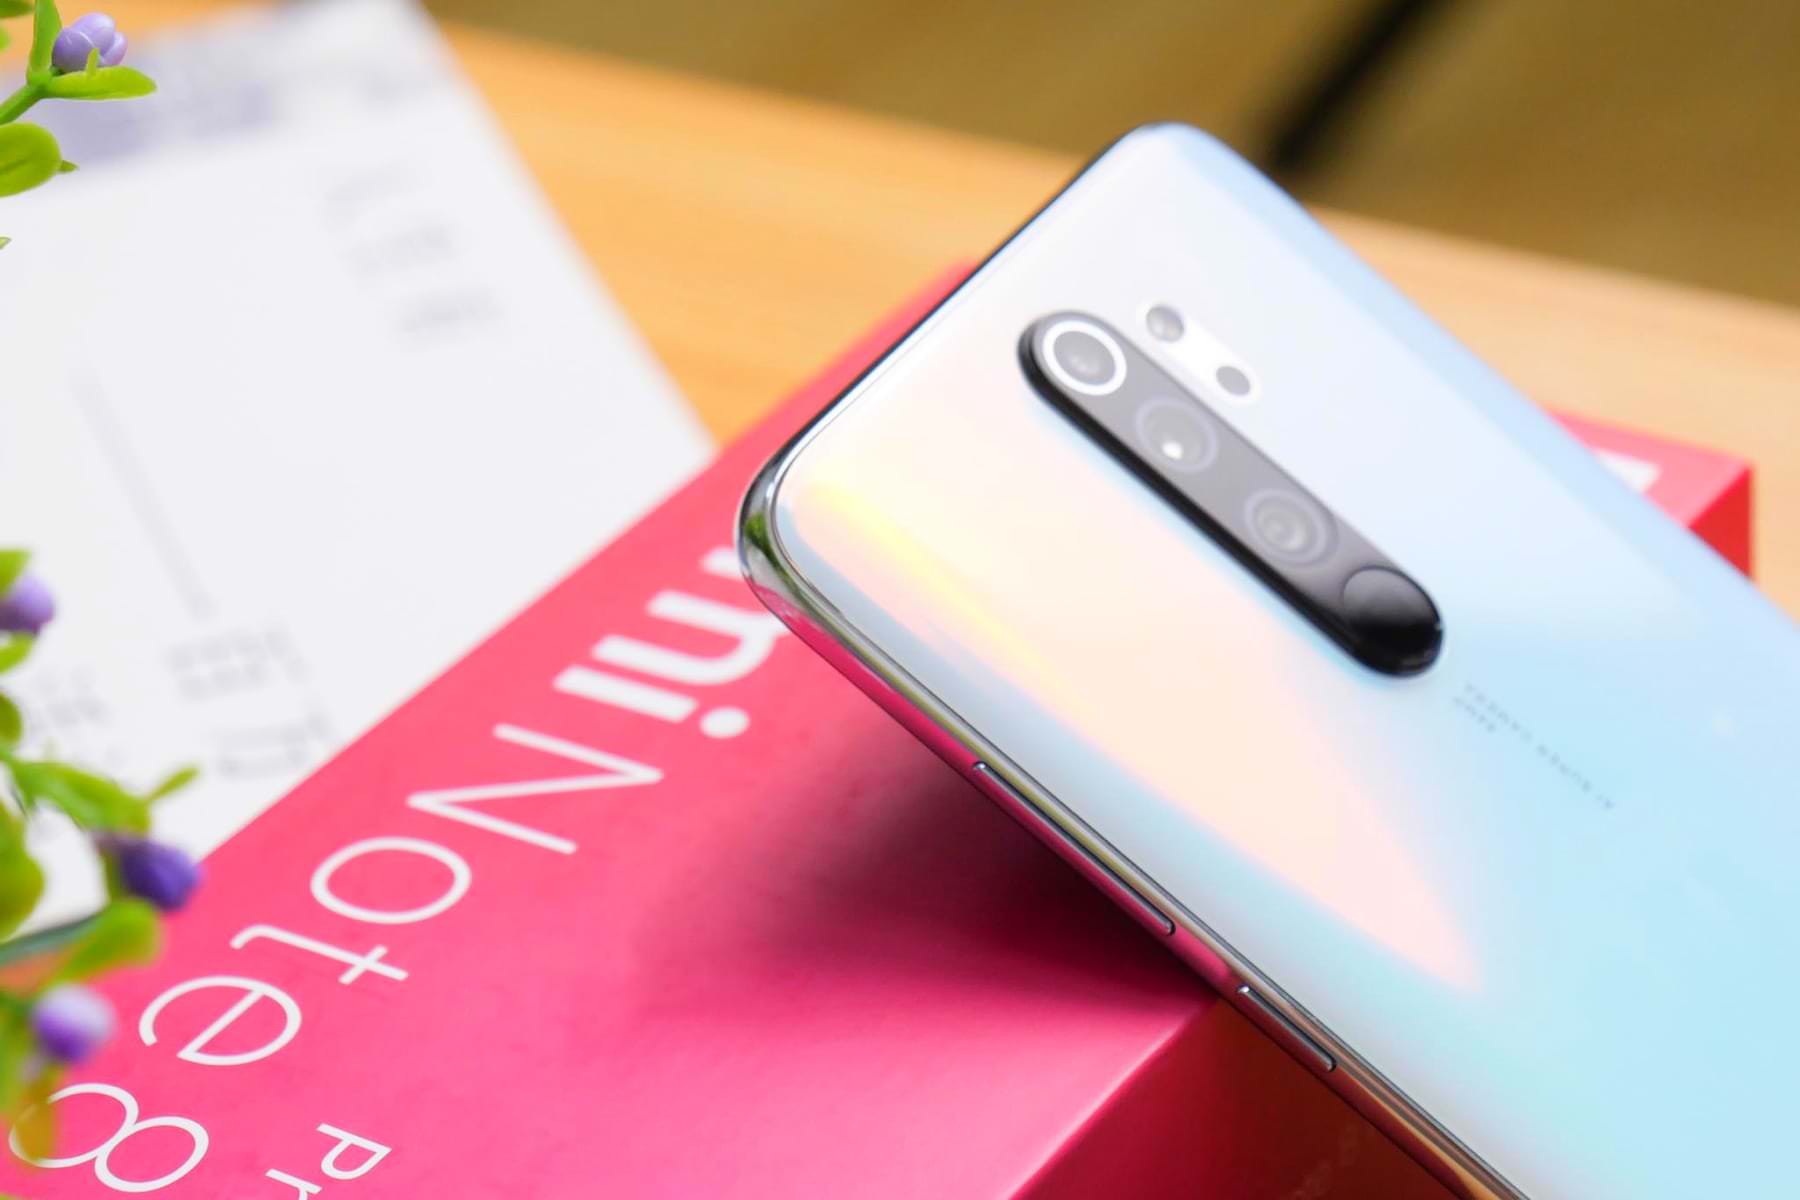 Redmi Note 8 Pro finally started getting Android 10 also outside China